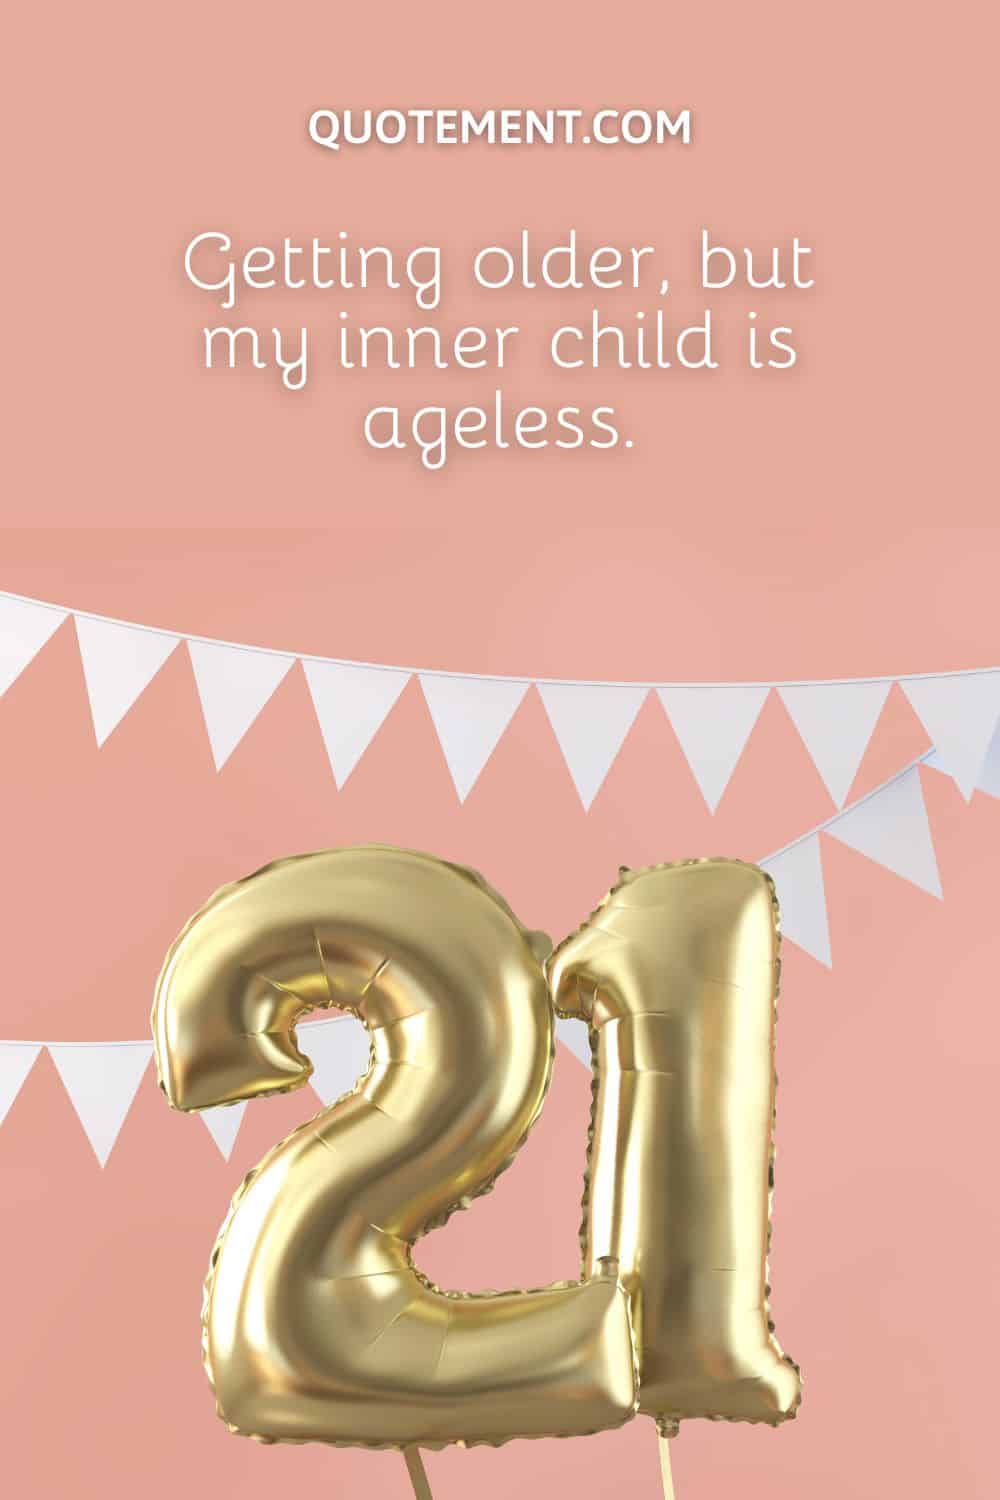 Getting older, but my inner child is ageless